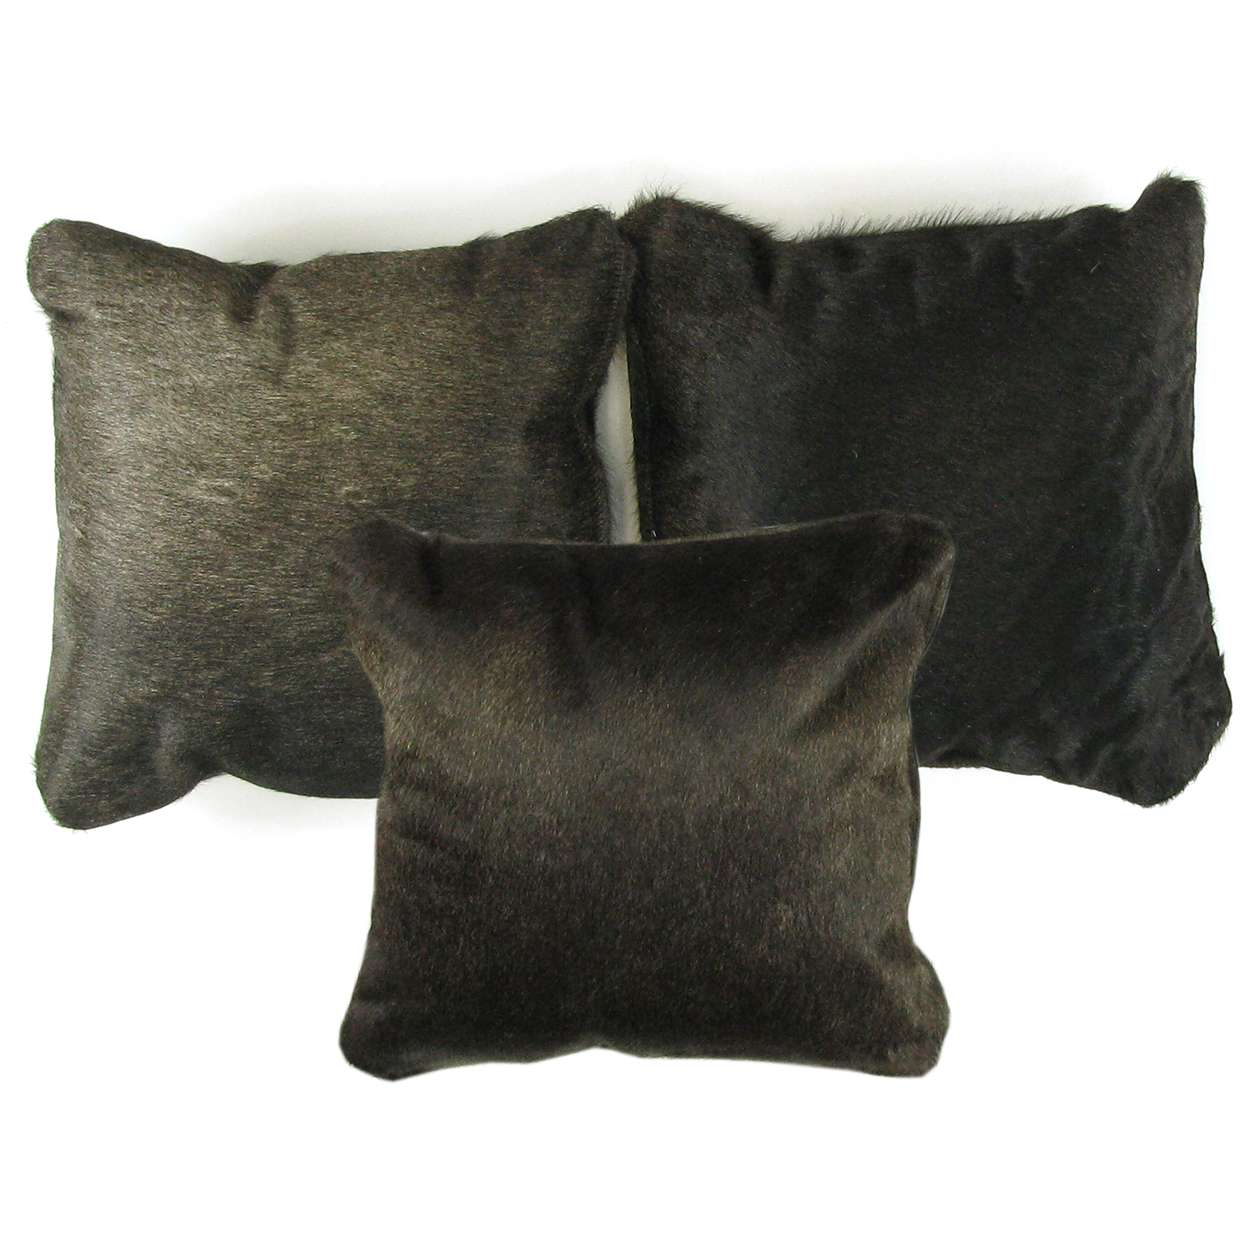 15in Overstuffed Cowhide Pillow - Dark Brown on Both Sides